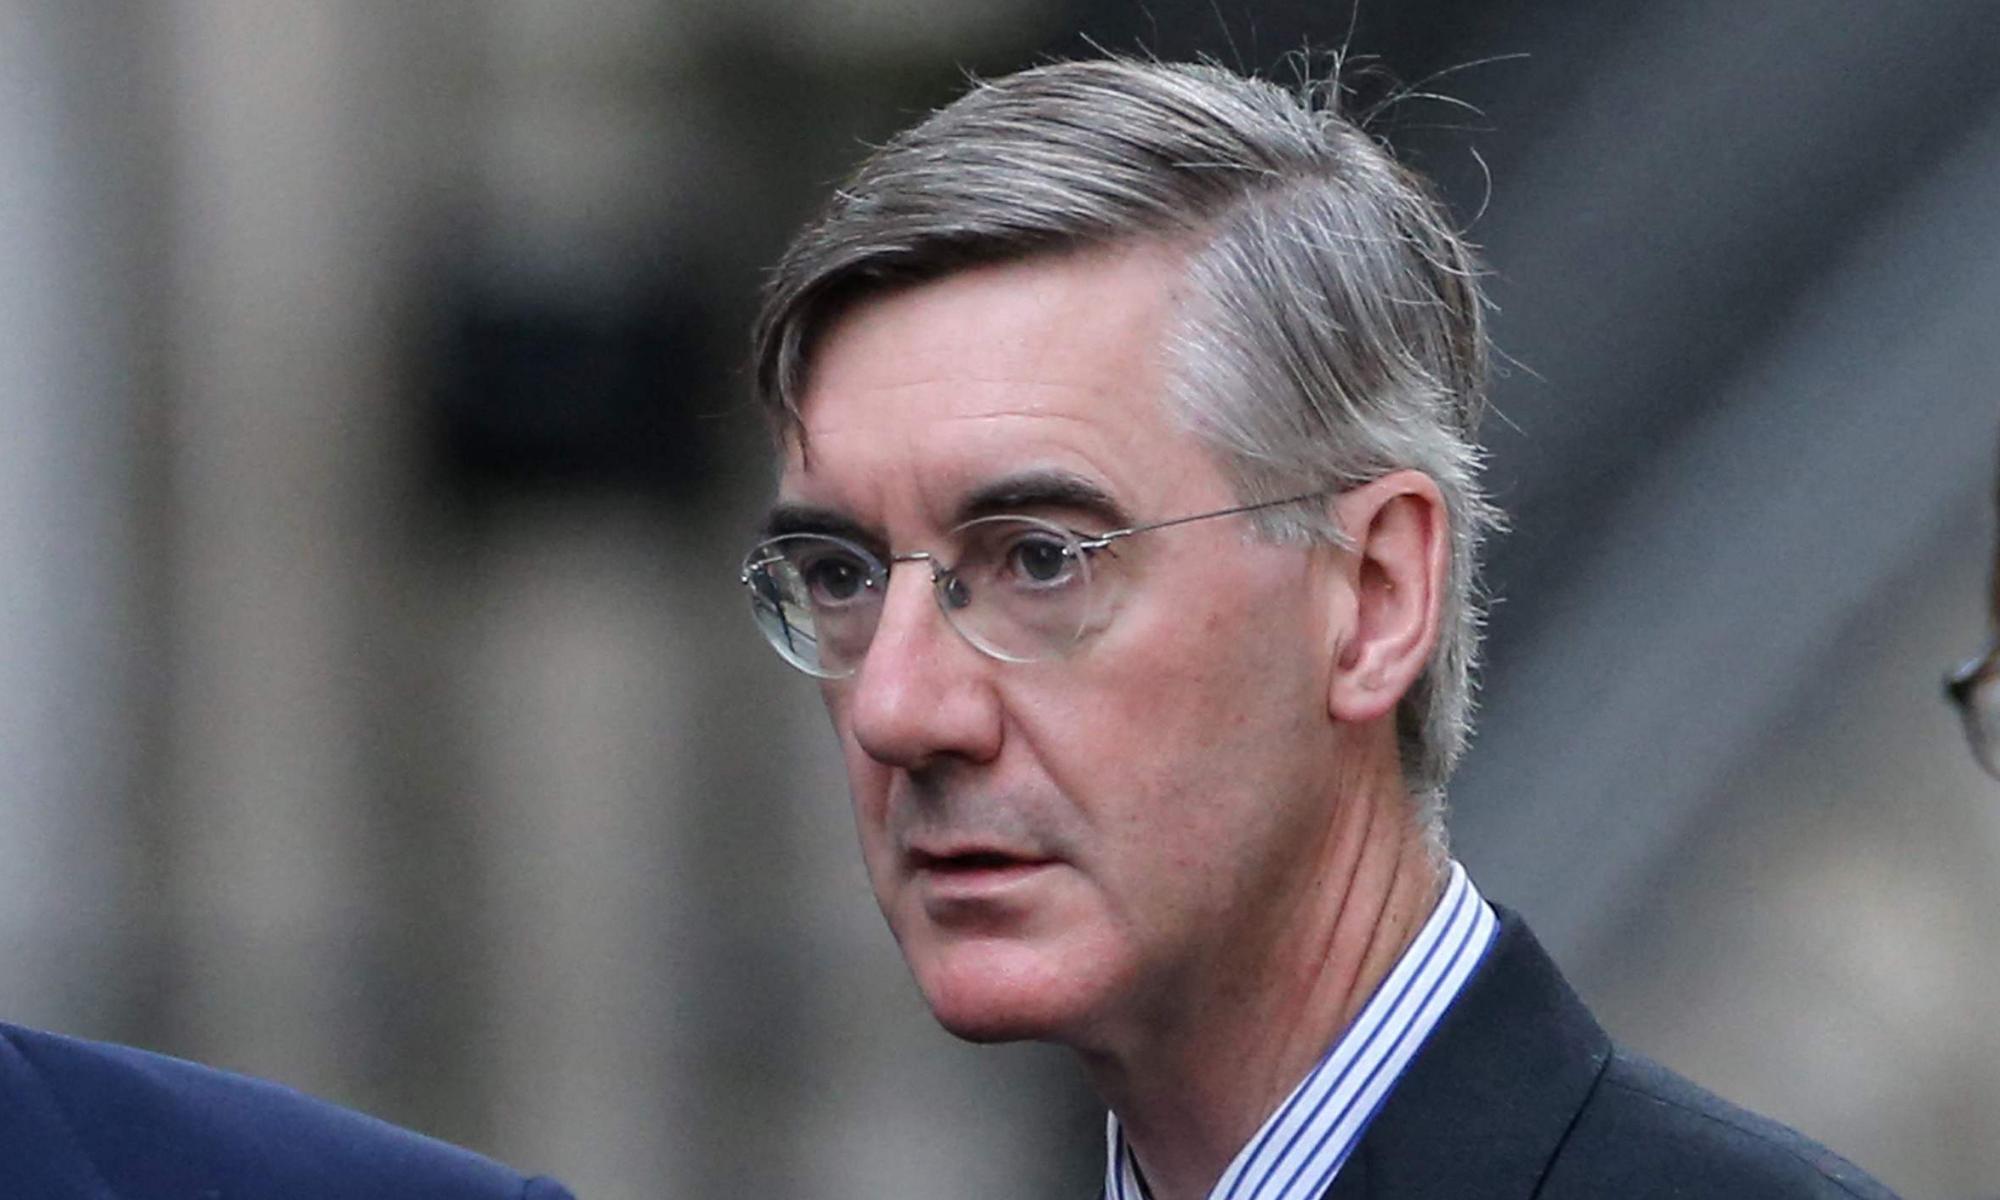 Jacob Rees-Mogg, who decried ‘climate alarmism’, to take on UK energy brief